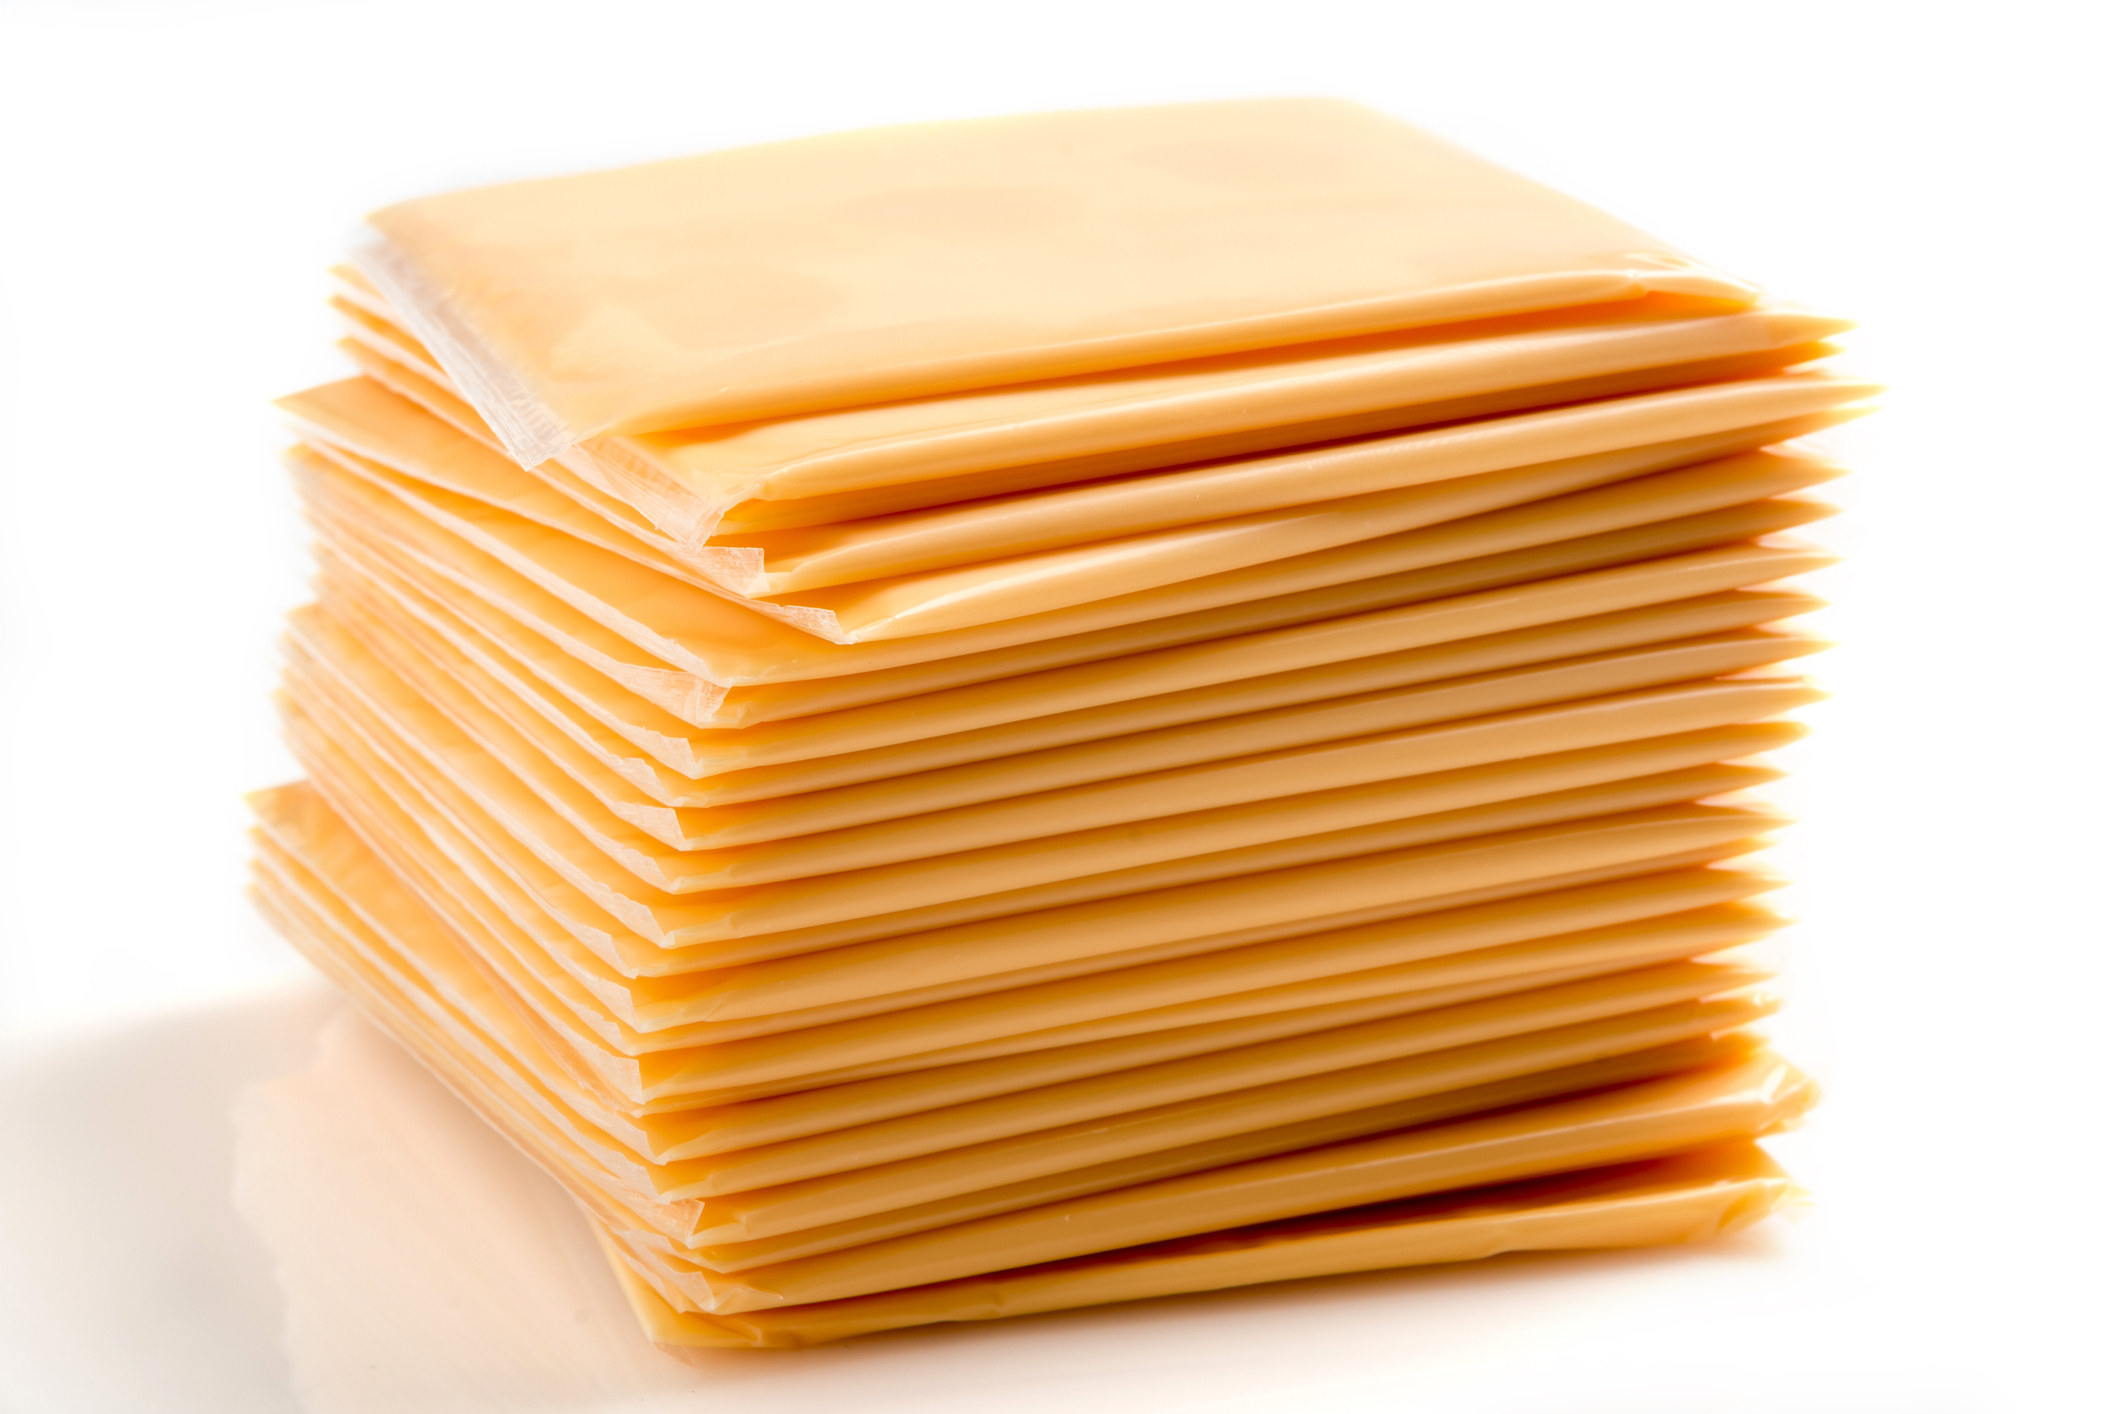 A stack of American cheese slices